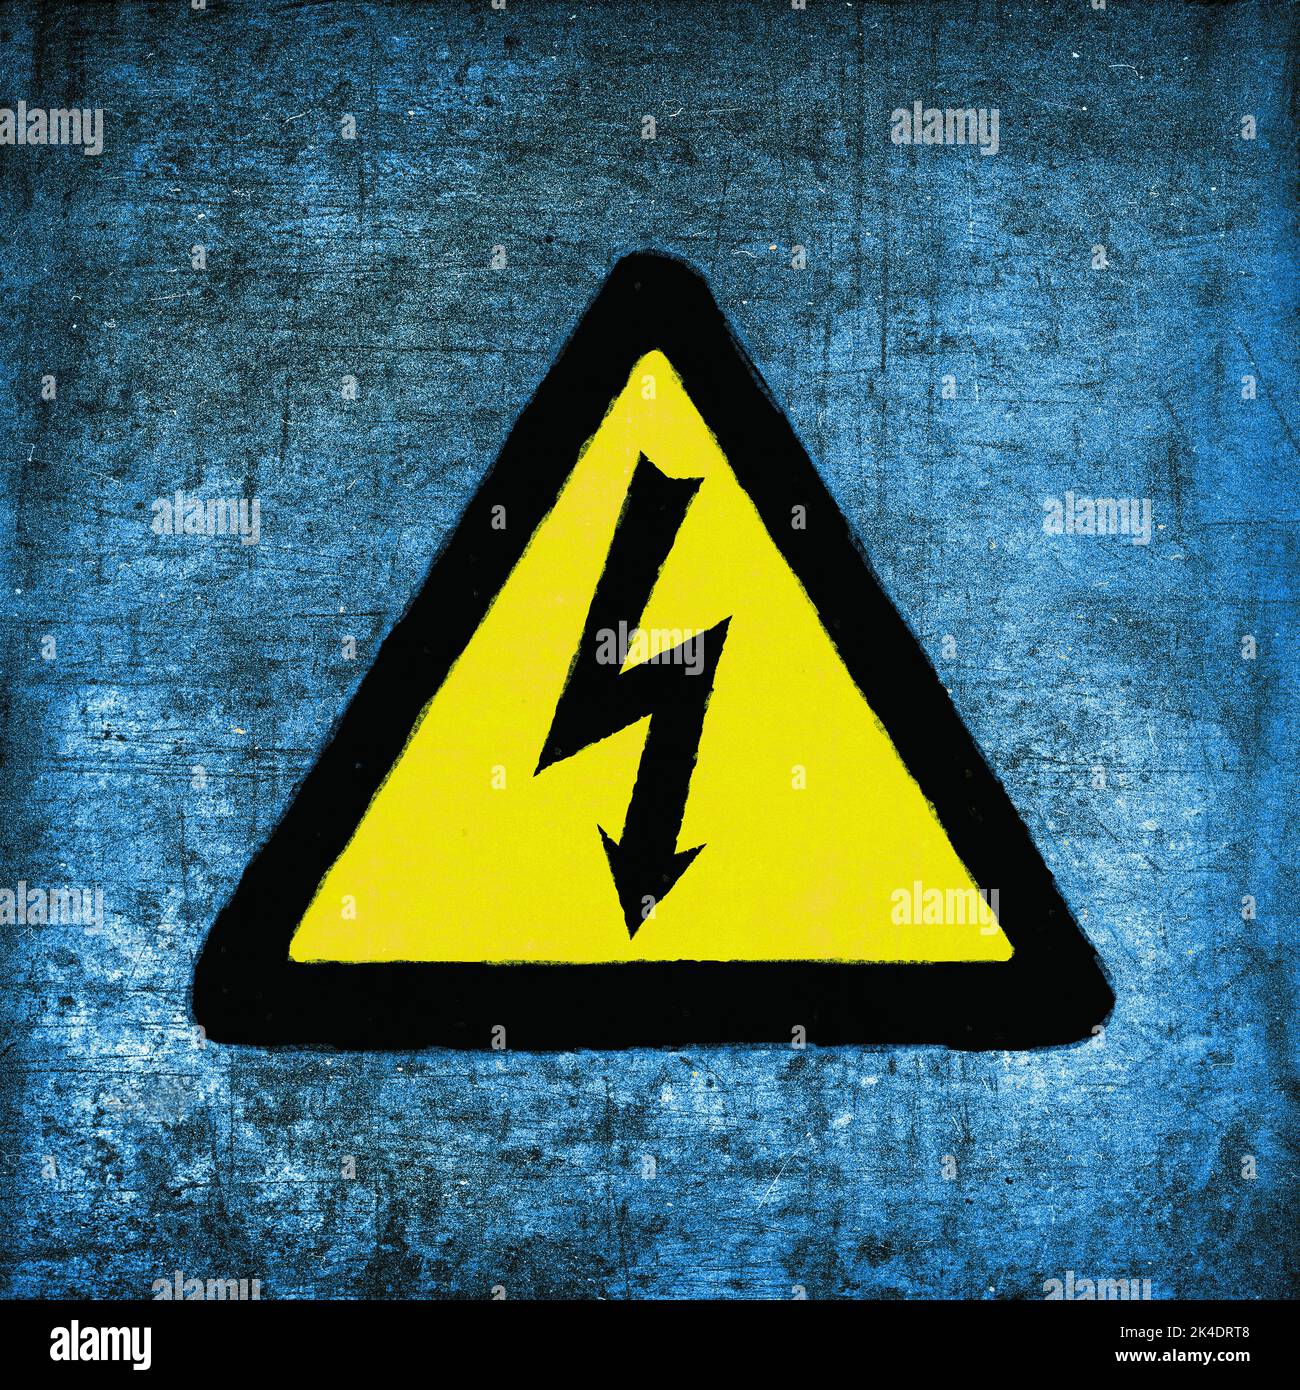 High voltage sign, yellow and black on blue. Electrical hazard emblem, grunge textured Stock Photo